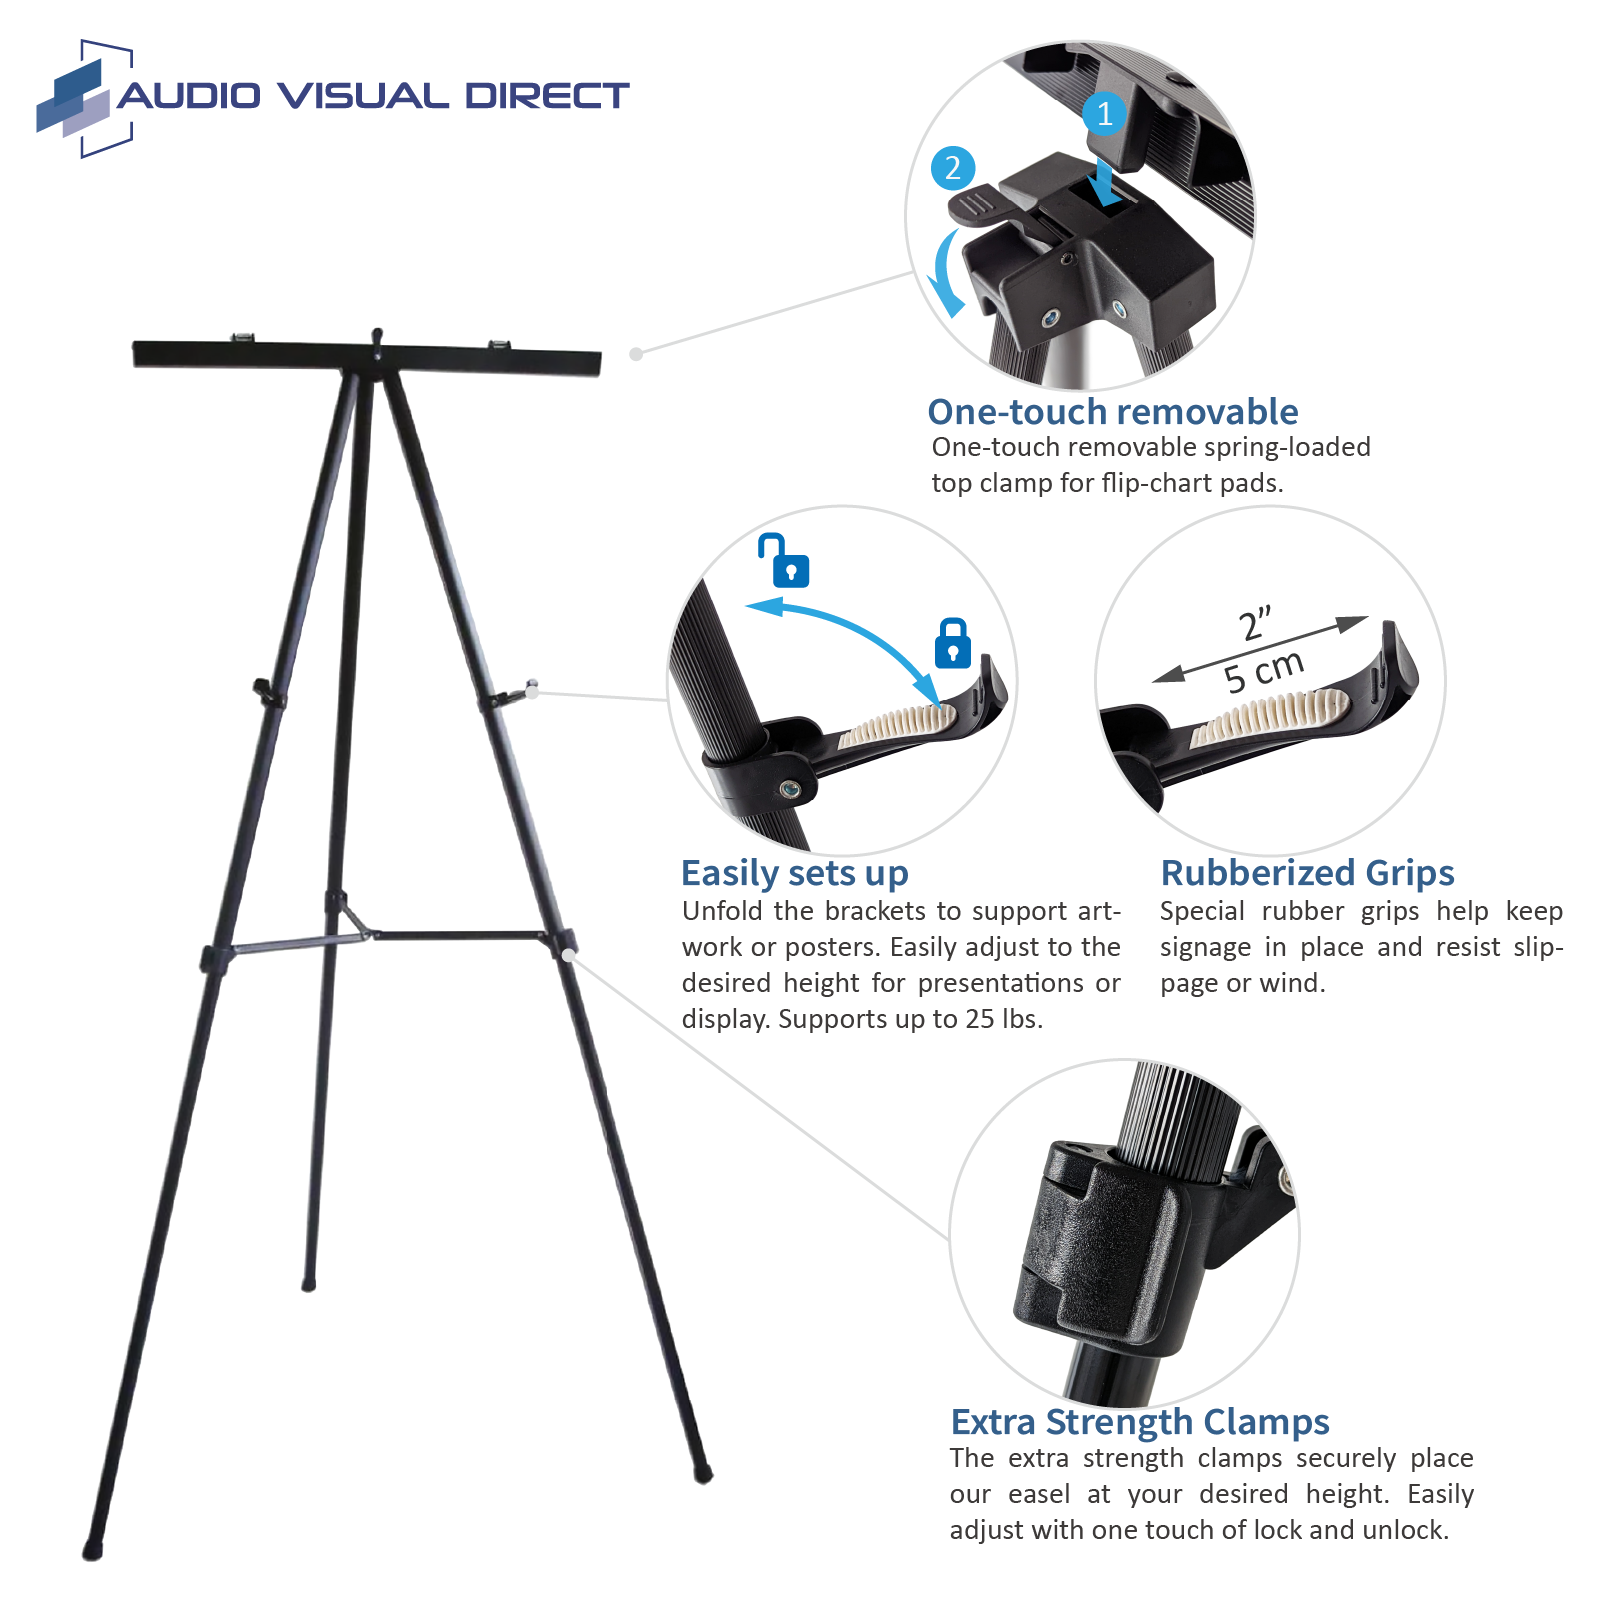 Info Graphic showing the one touch removable pad holder, adjustable art easels, rubberized grips, and extra strength clamps. 